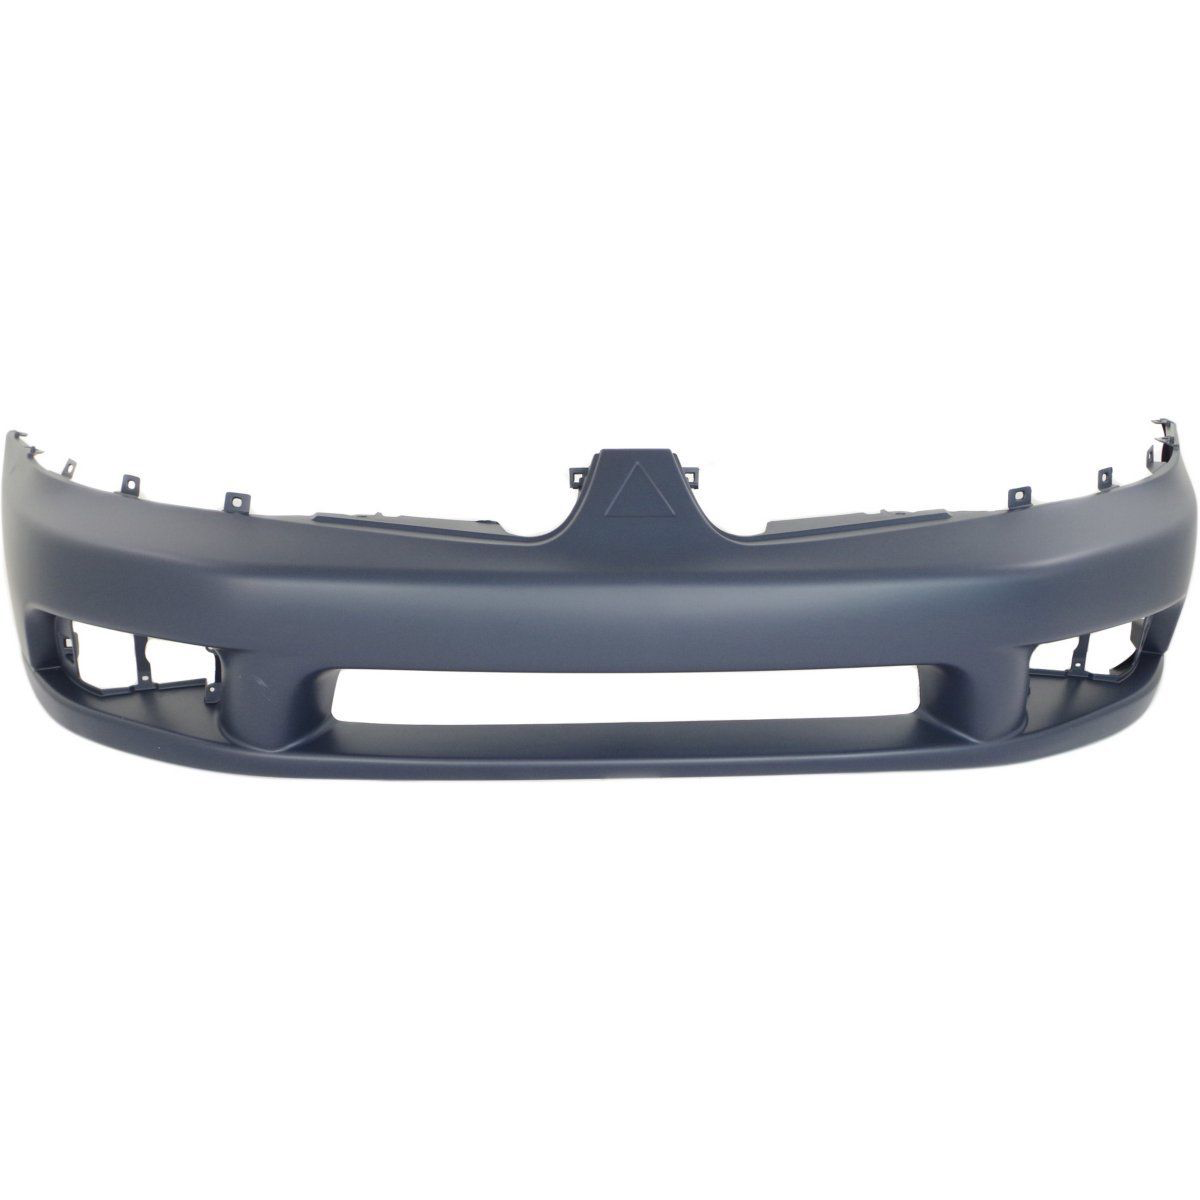 2002-2003 MITSUBISHI GALANT Front Bumper Cover Painted to Match